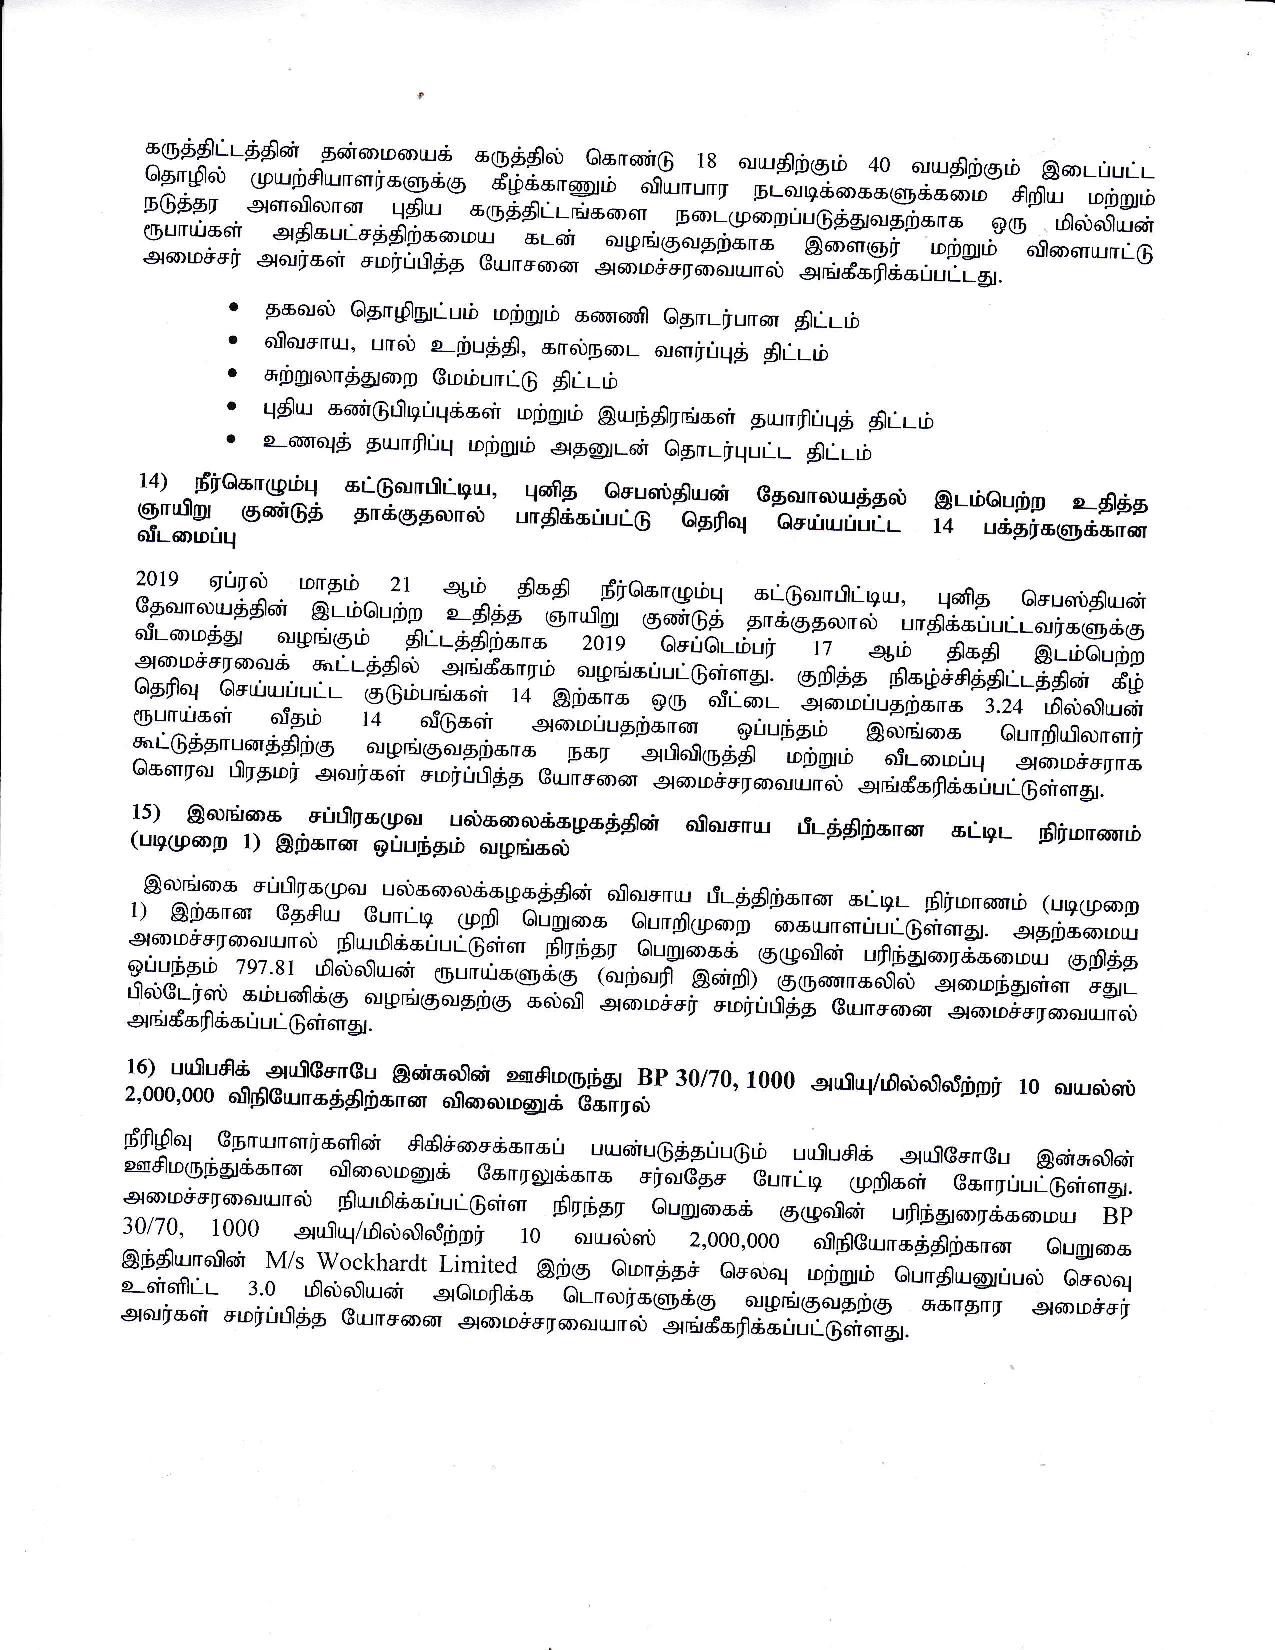 Cabinet Decision on 26.10.2020 Tamil page 005